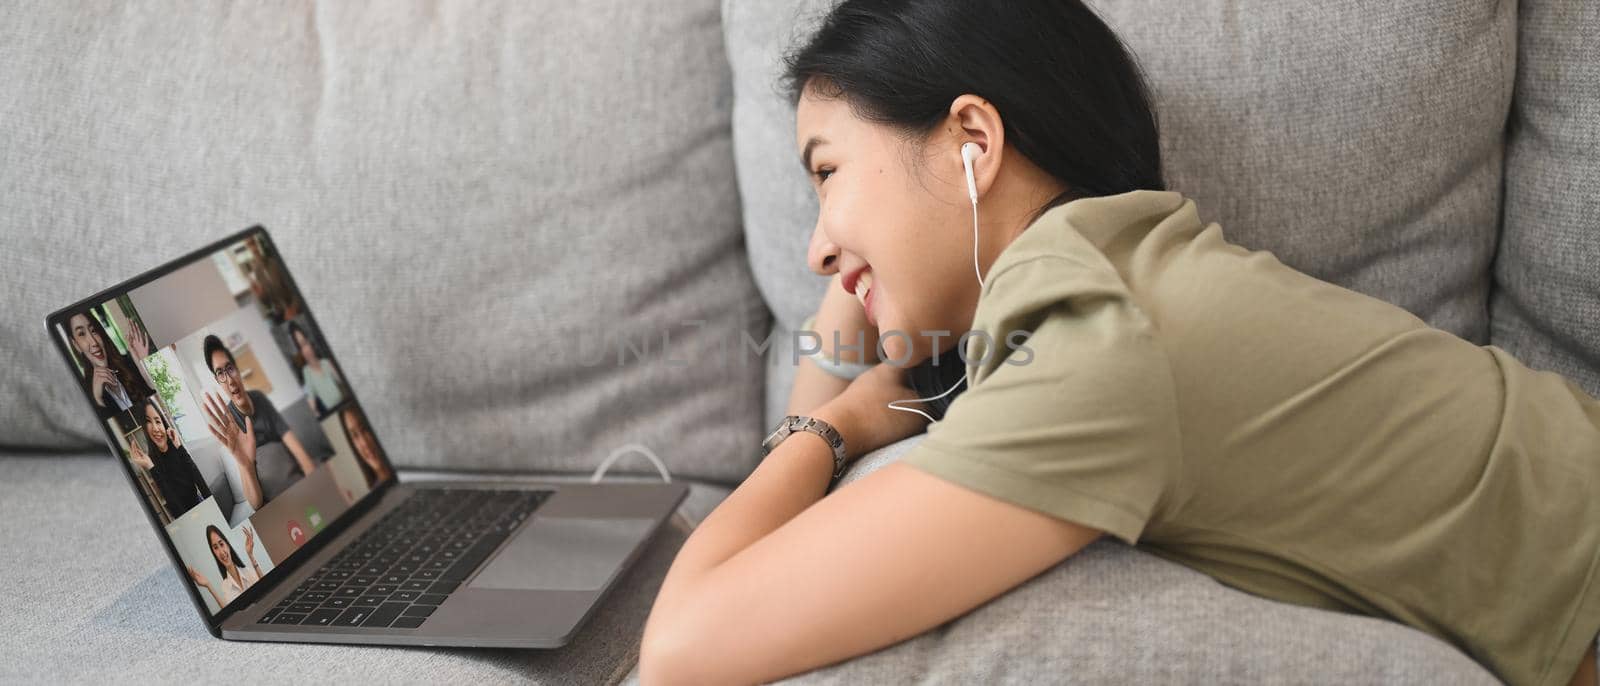 Cheerful young woman communicating by video conference via laptop while lying on couch at home.